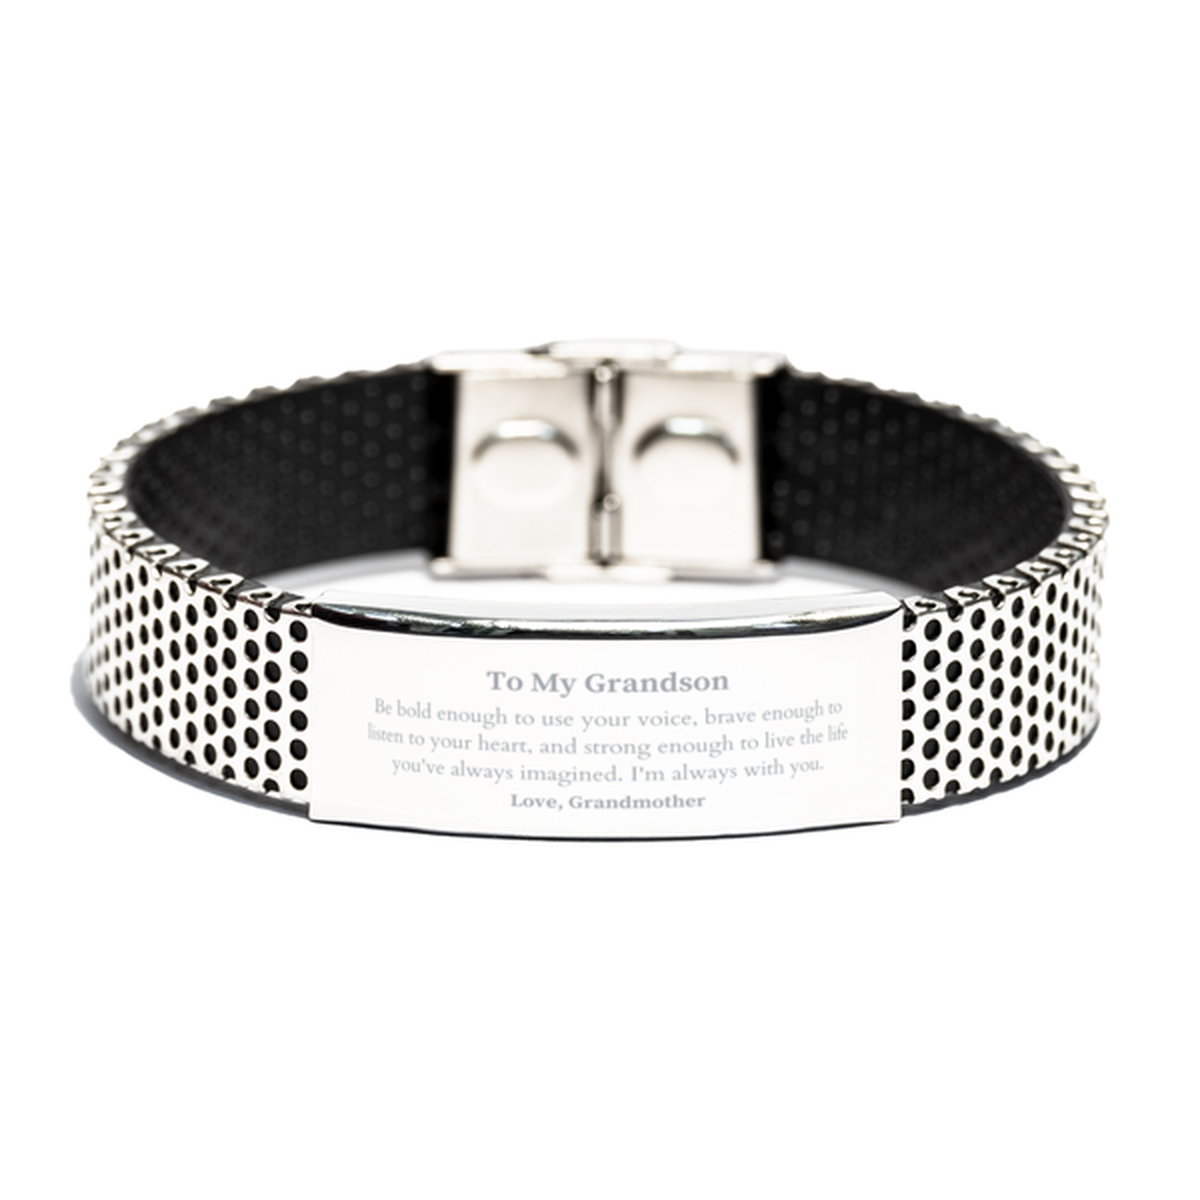 Keepsake Grandson Stainless Steel Bracelet Gift Idea Graduation Christmas Birthday Grandson from Grandmother, Grandson Be bold enough to use your voice, brave enough to listen to your heart. Love, Grandmother